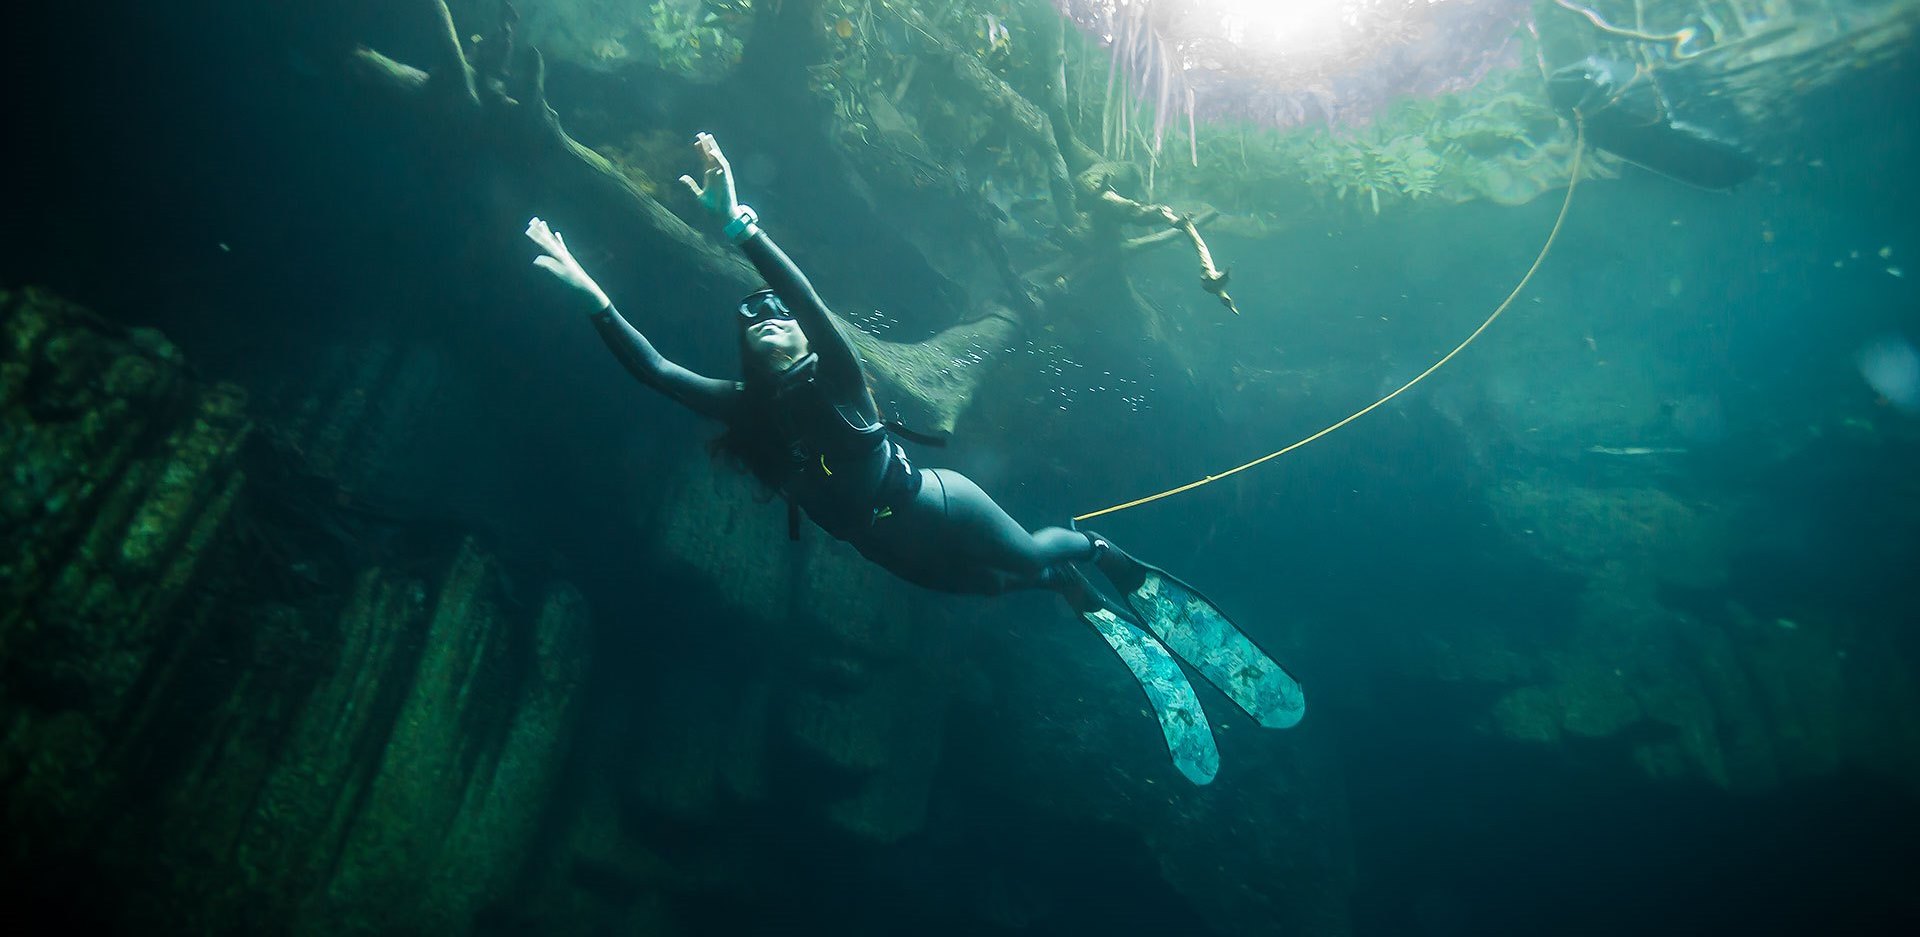 Things You Need To Know Before Enrolling For The Freedive Instructor Courses